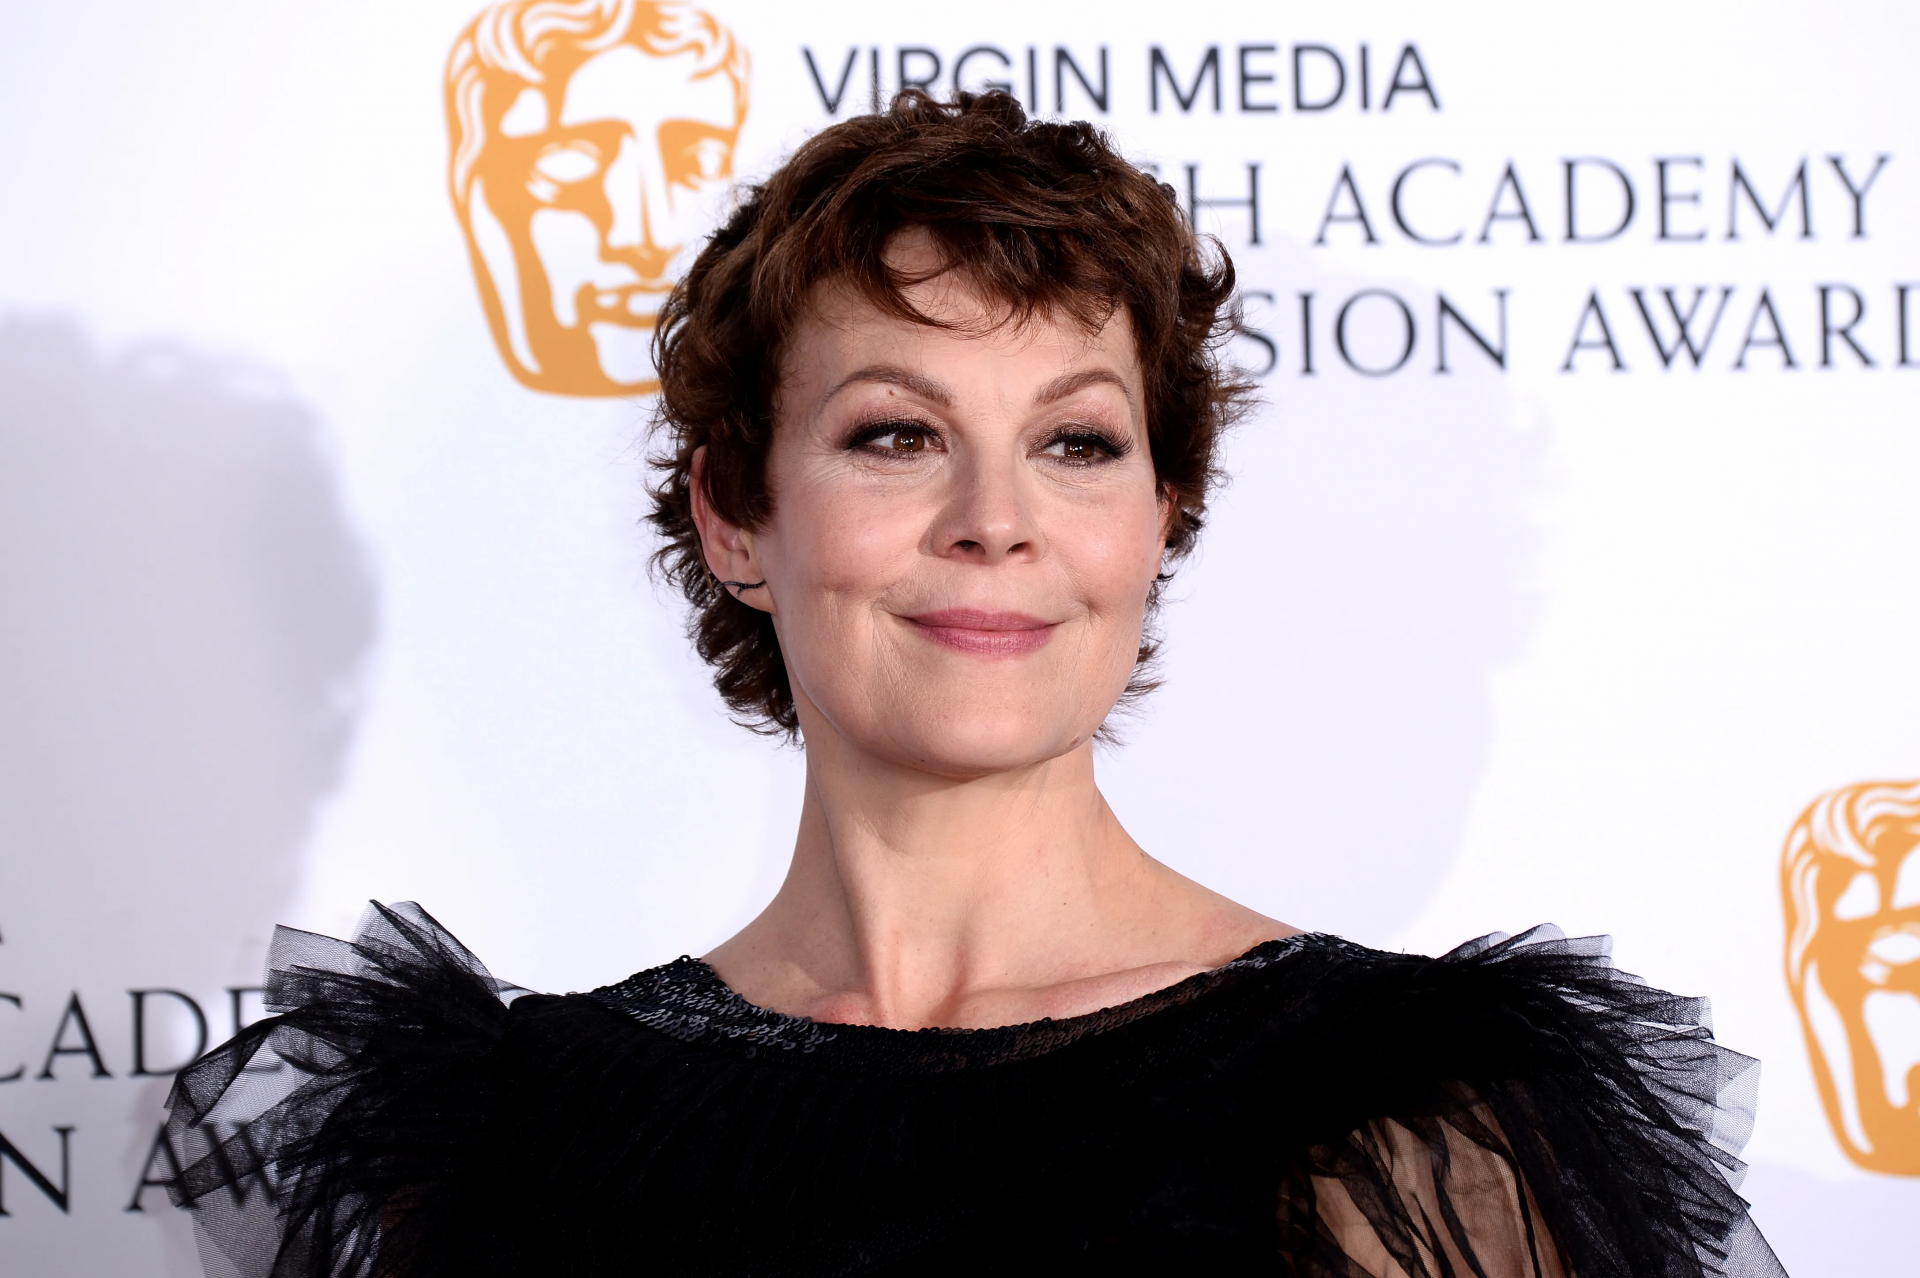 Who is Helen McCrory: Bio, Acting Career, Personal Life